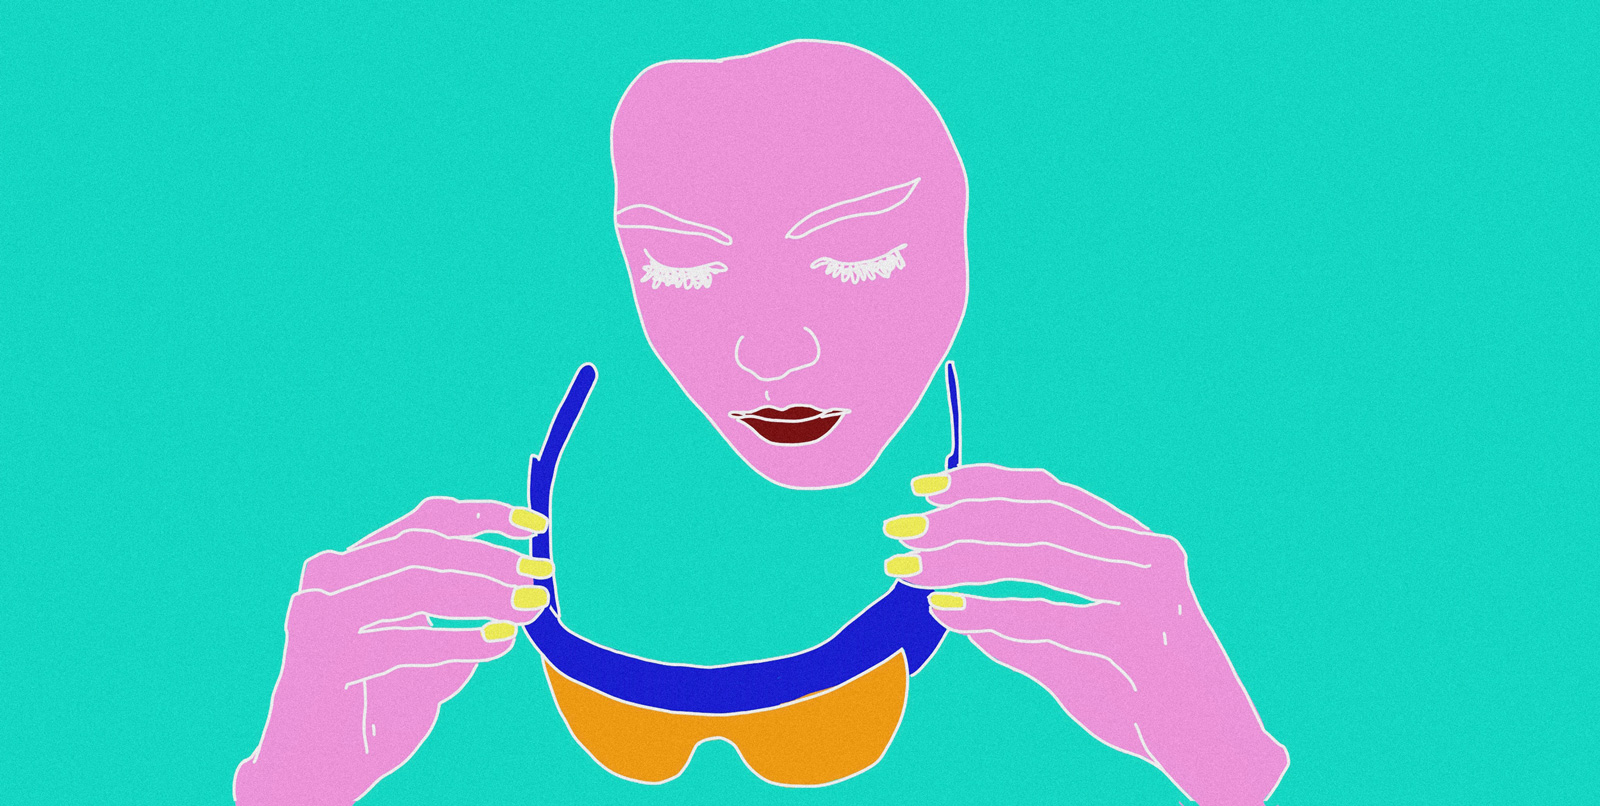 Colourful illustration of someone putting sun glasses on their face, 